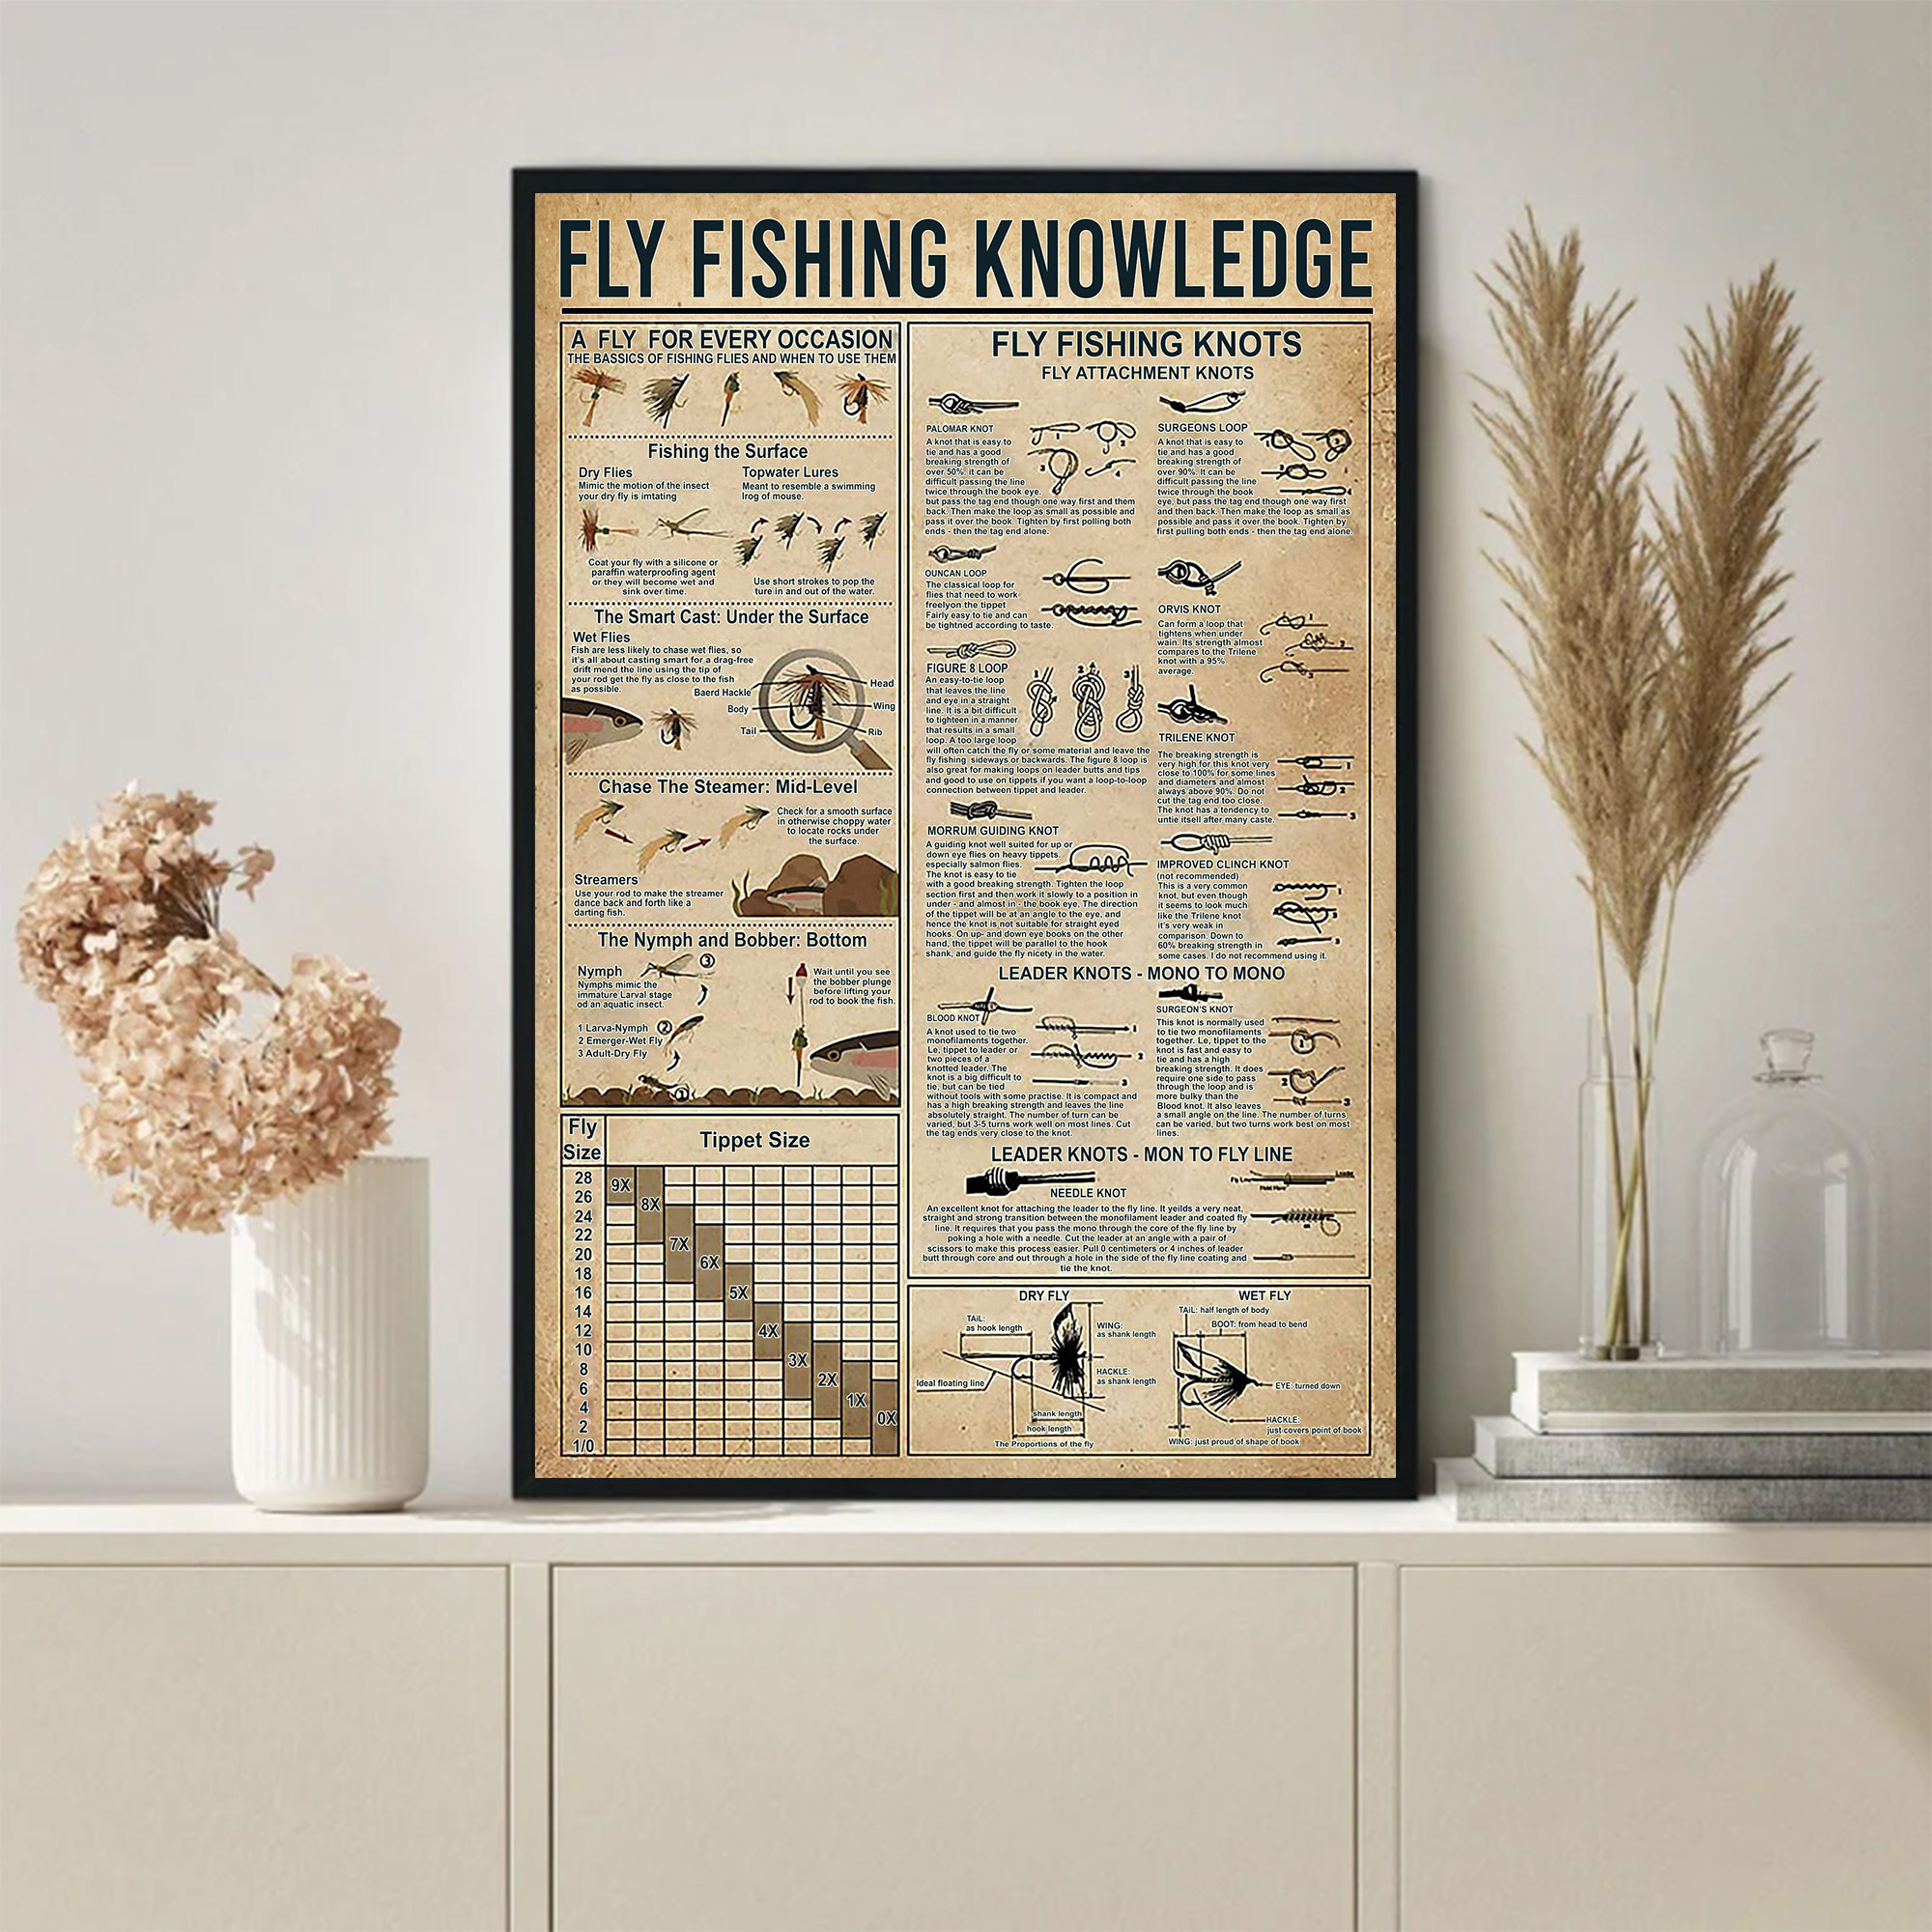 Fly Fishing Know Ledge Poster, Knowledge Poster, Vintage Poster